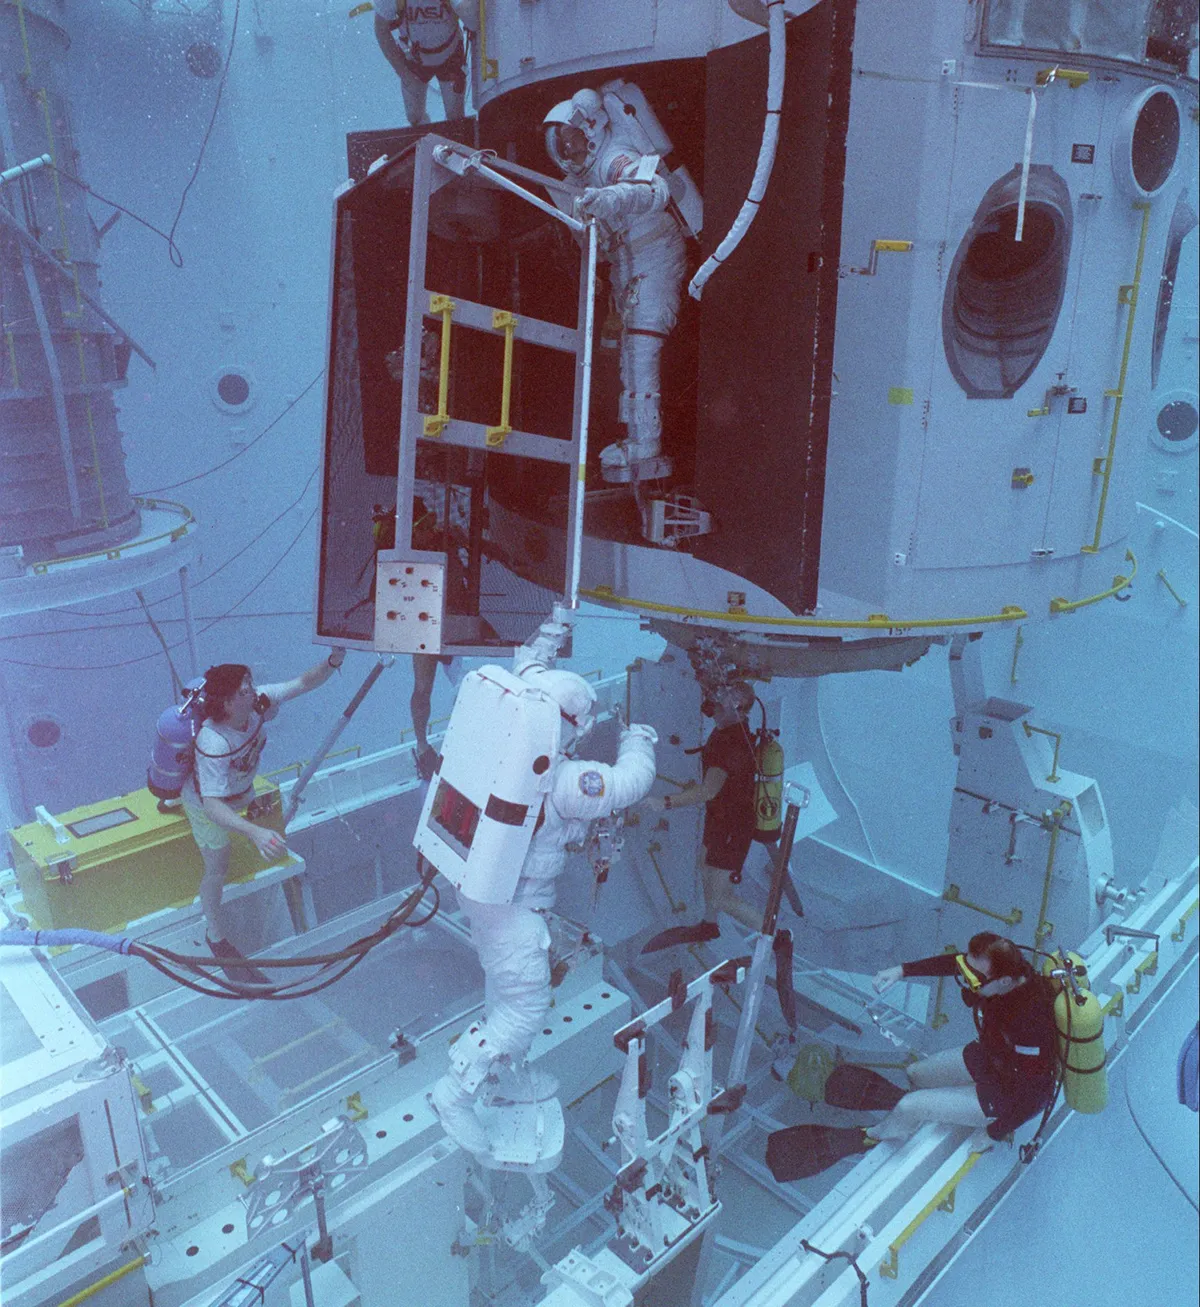 One of the STS-61 crew trains in the Neutral Buoyancy Simulator at the Marshall Space Flight Center. Credit: NASA